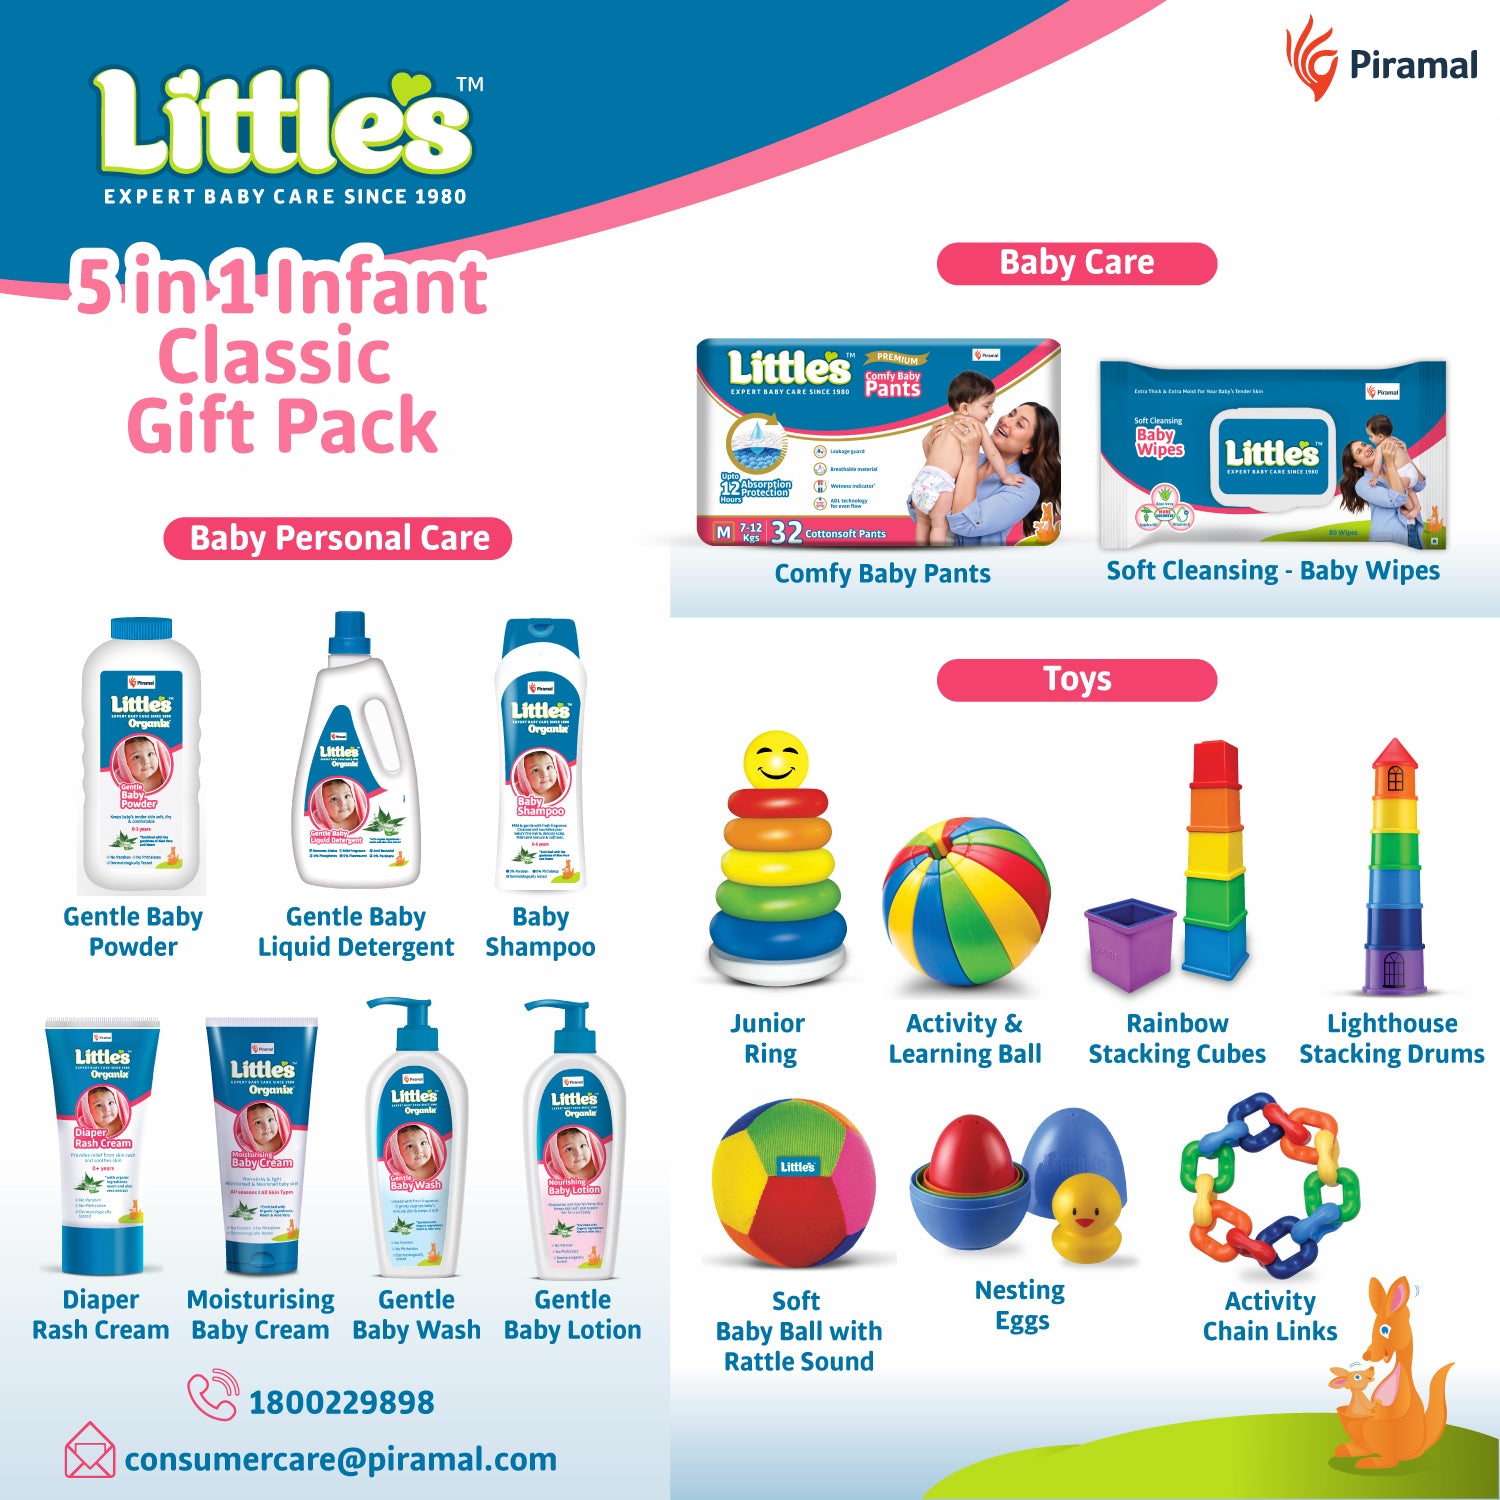 Little's 5 in 1 Infant Classic Gift Pack | Activity & Learning Toys for Babies | Multicolour | Infant & Preschool Toys | Develops fine motor skills & reasoning skills | 5 months and above